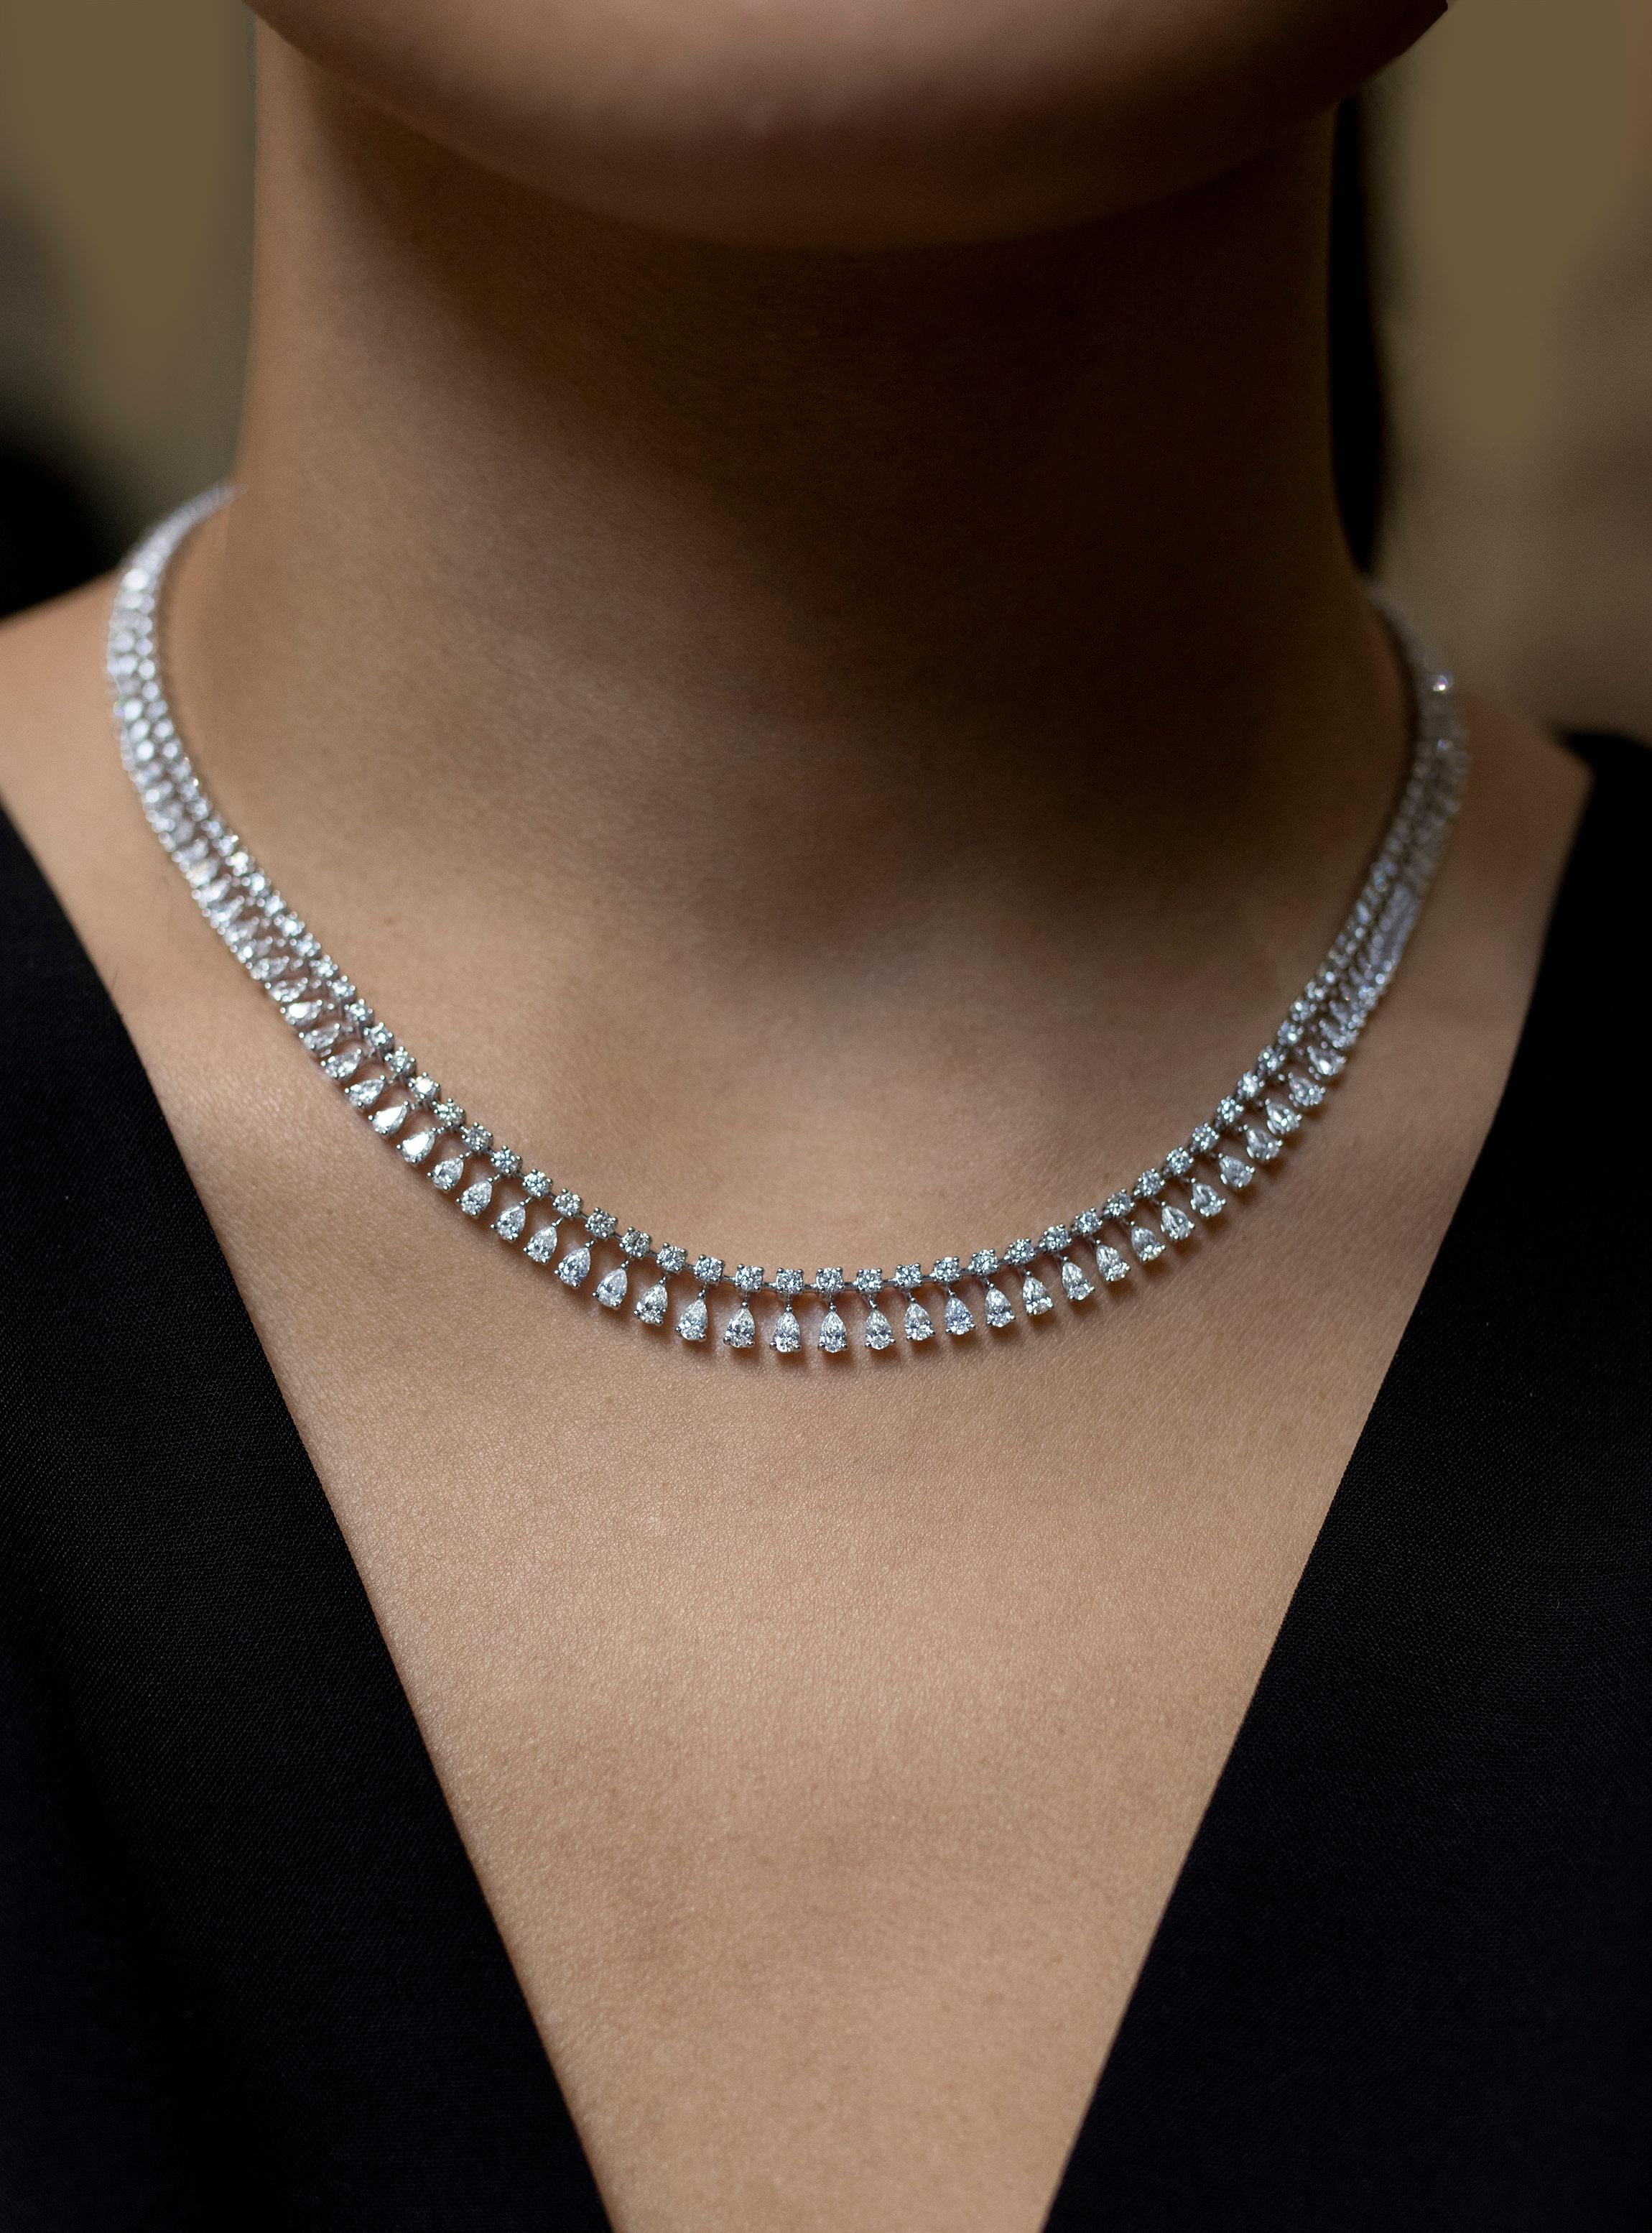 Contemporary Roman Malakov, 10.99 Total Carats Round and Pear Shape Diamond Riviere Necklace For Sale